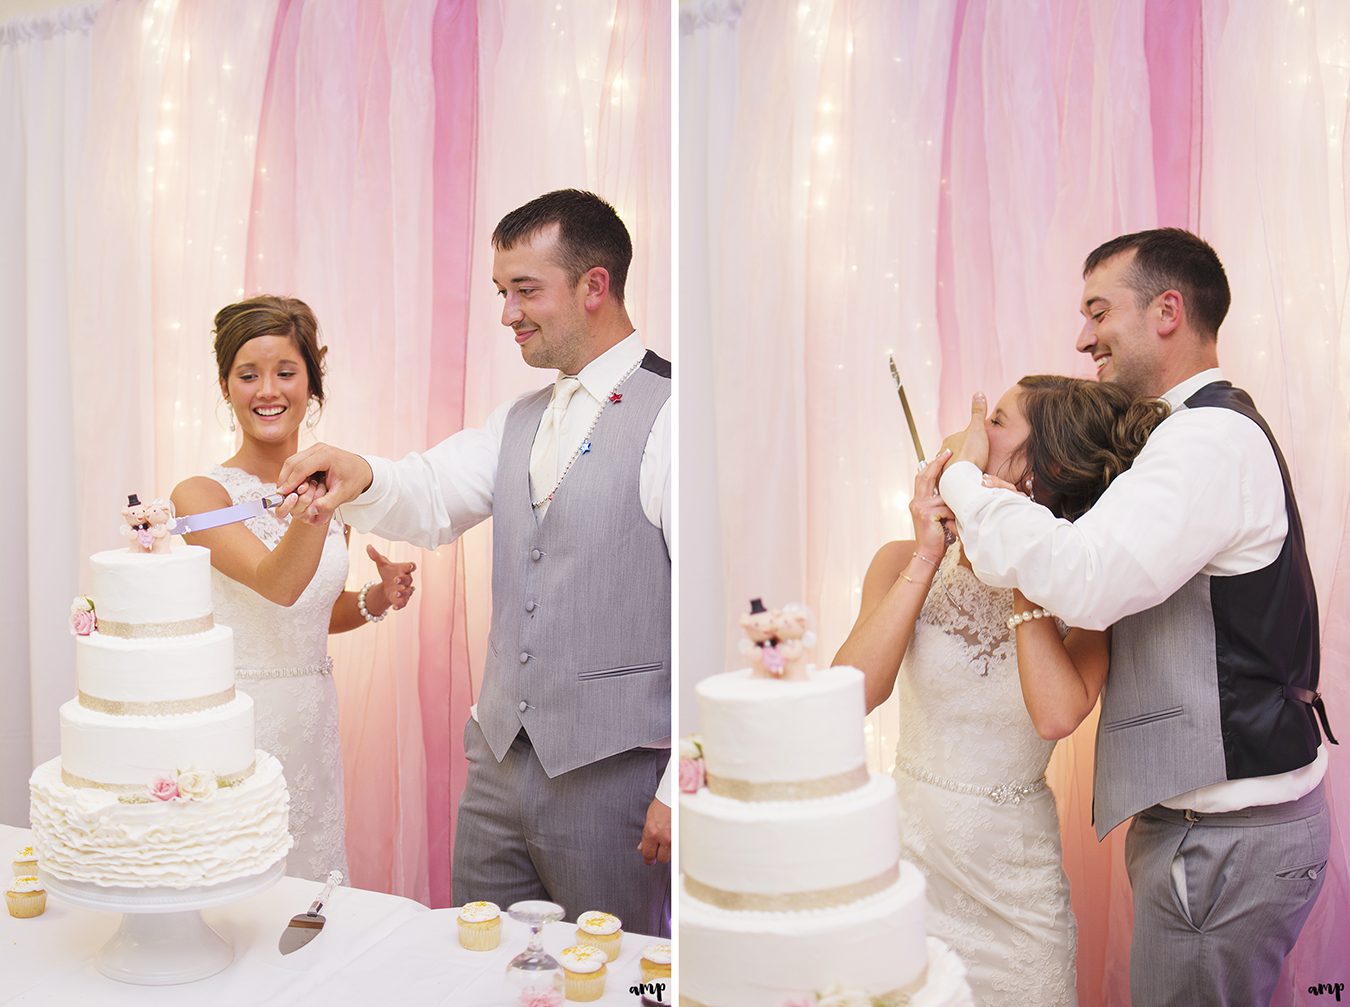 Bride and groom cutting the wedding cake